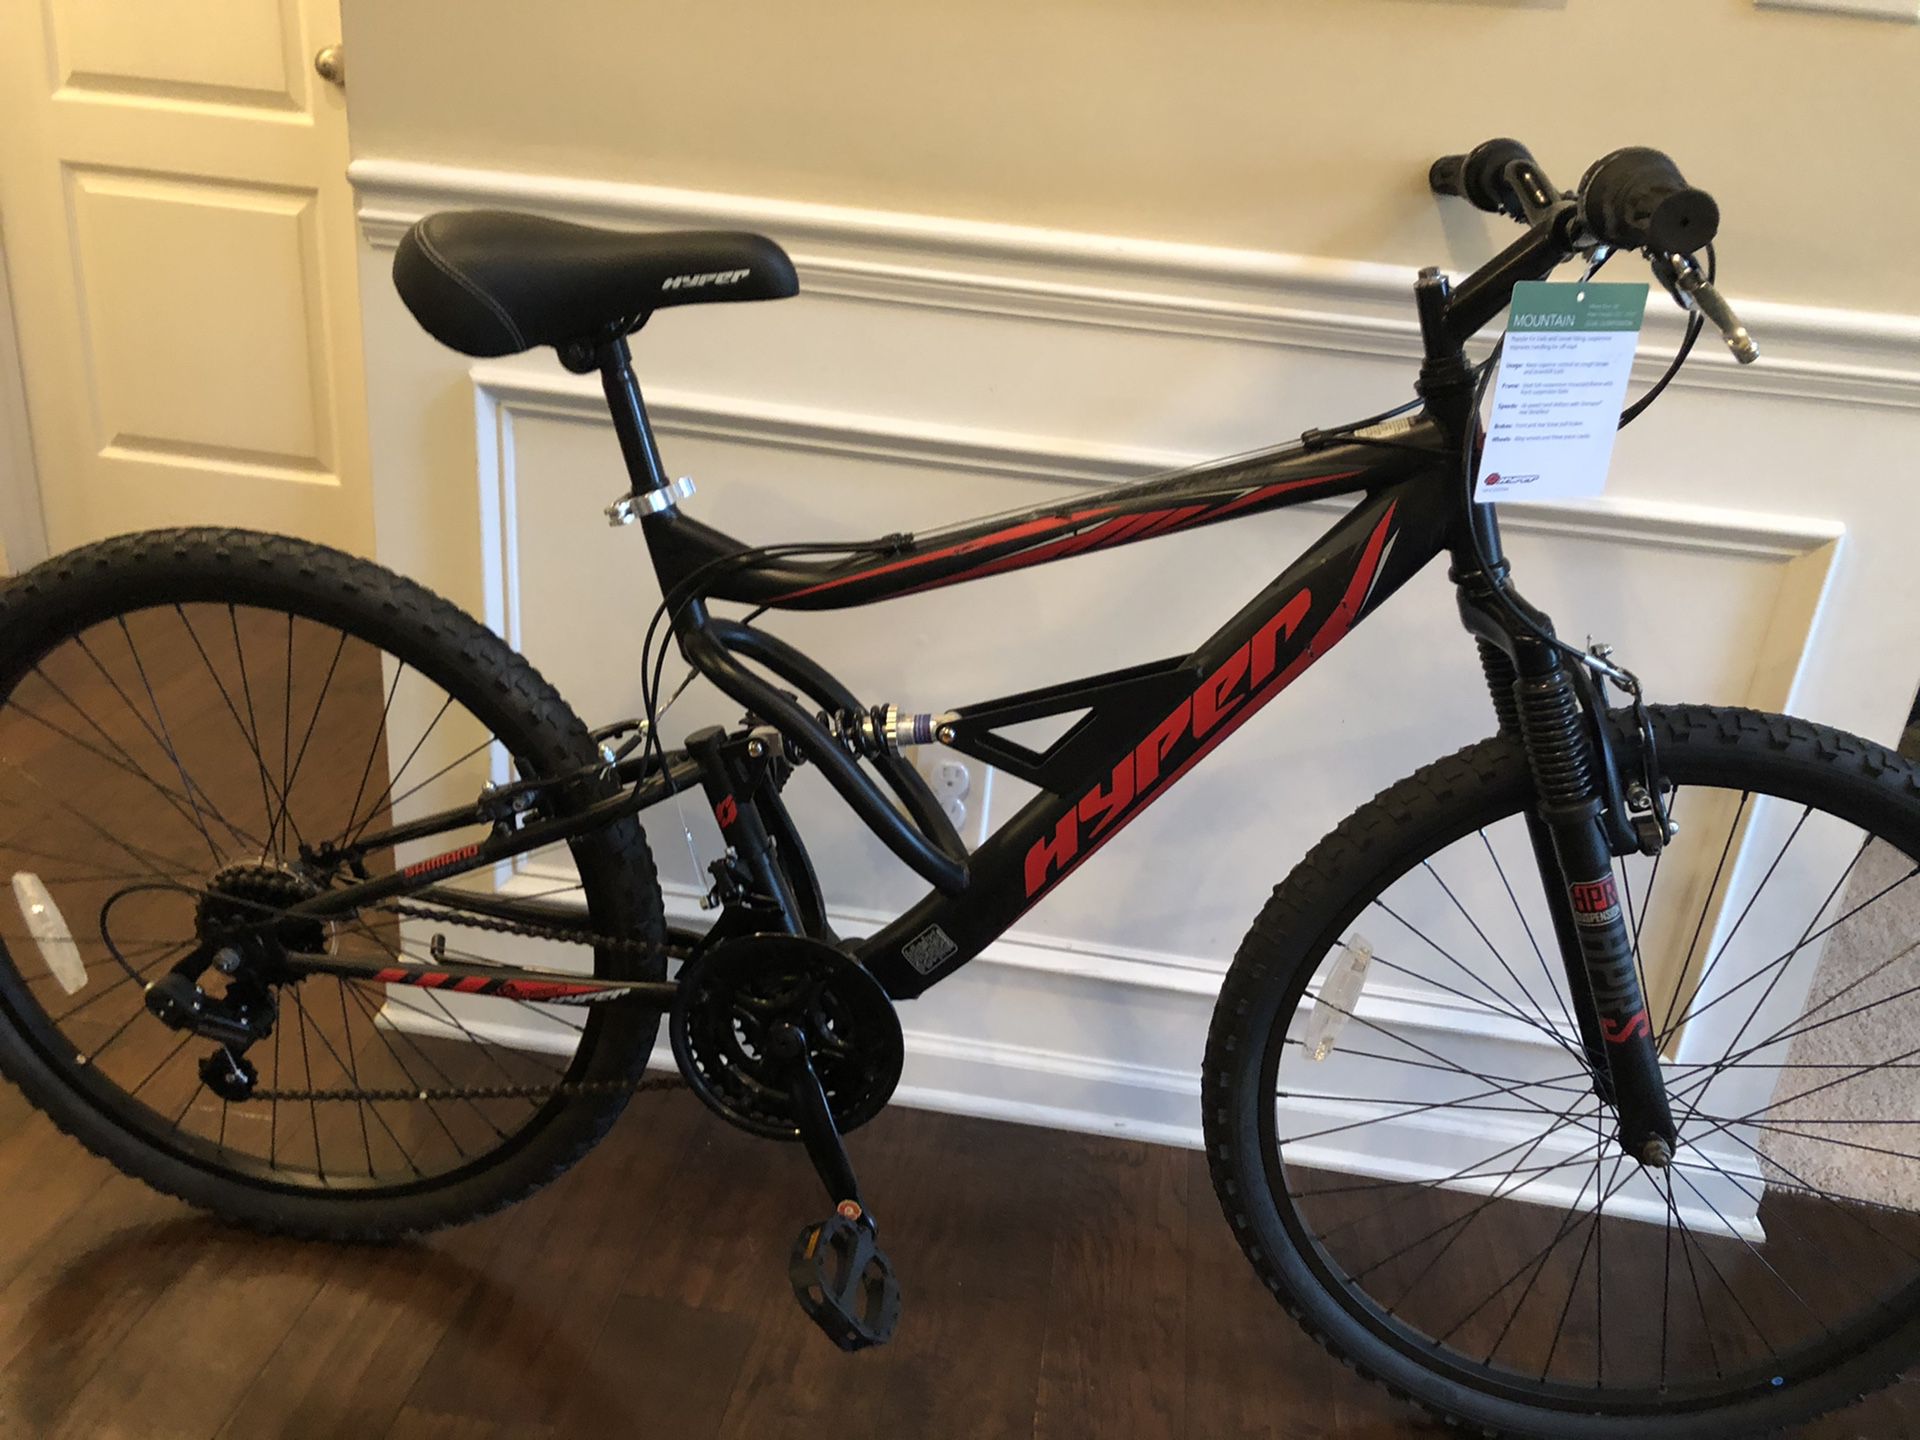 26” Full Suspension Mountain Bike - Excellent Condition